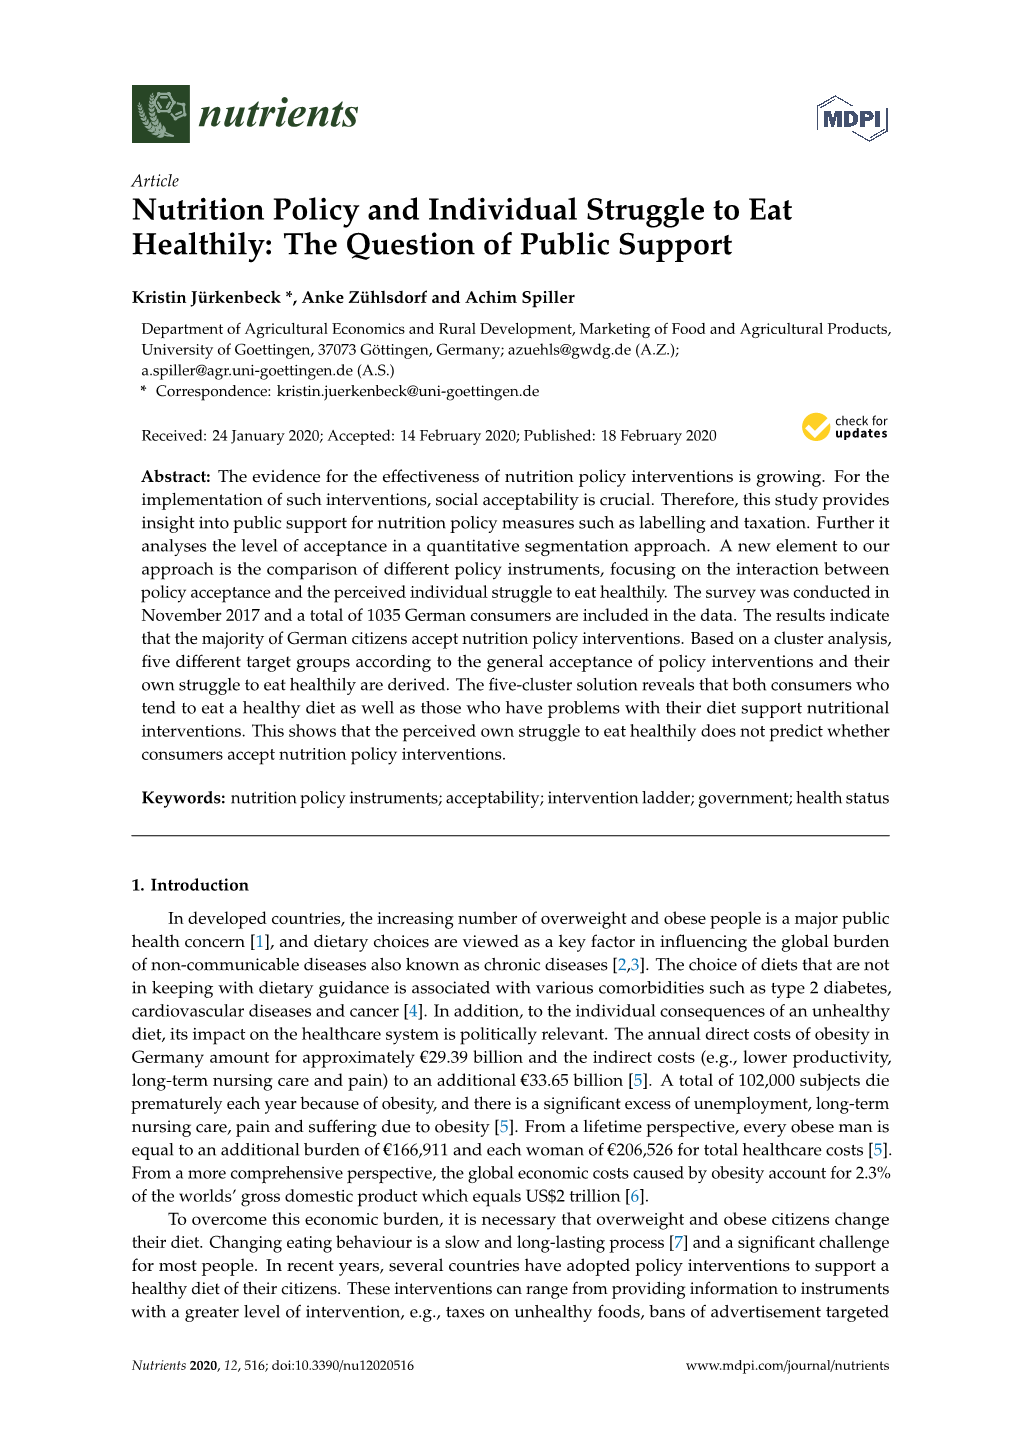 Nutrition Policy and Individual Struggle to Eat Healthily: the Question of Public Support